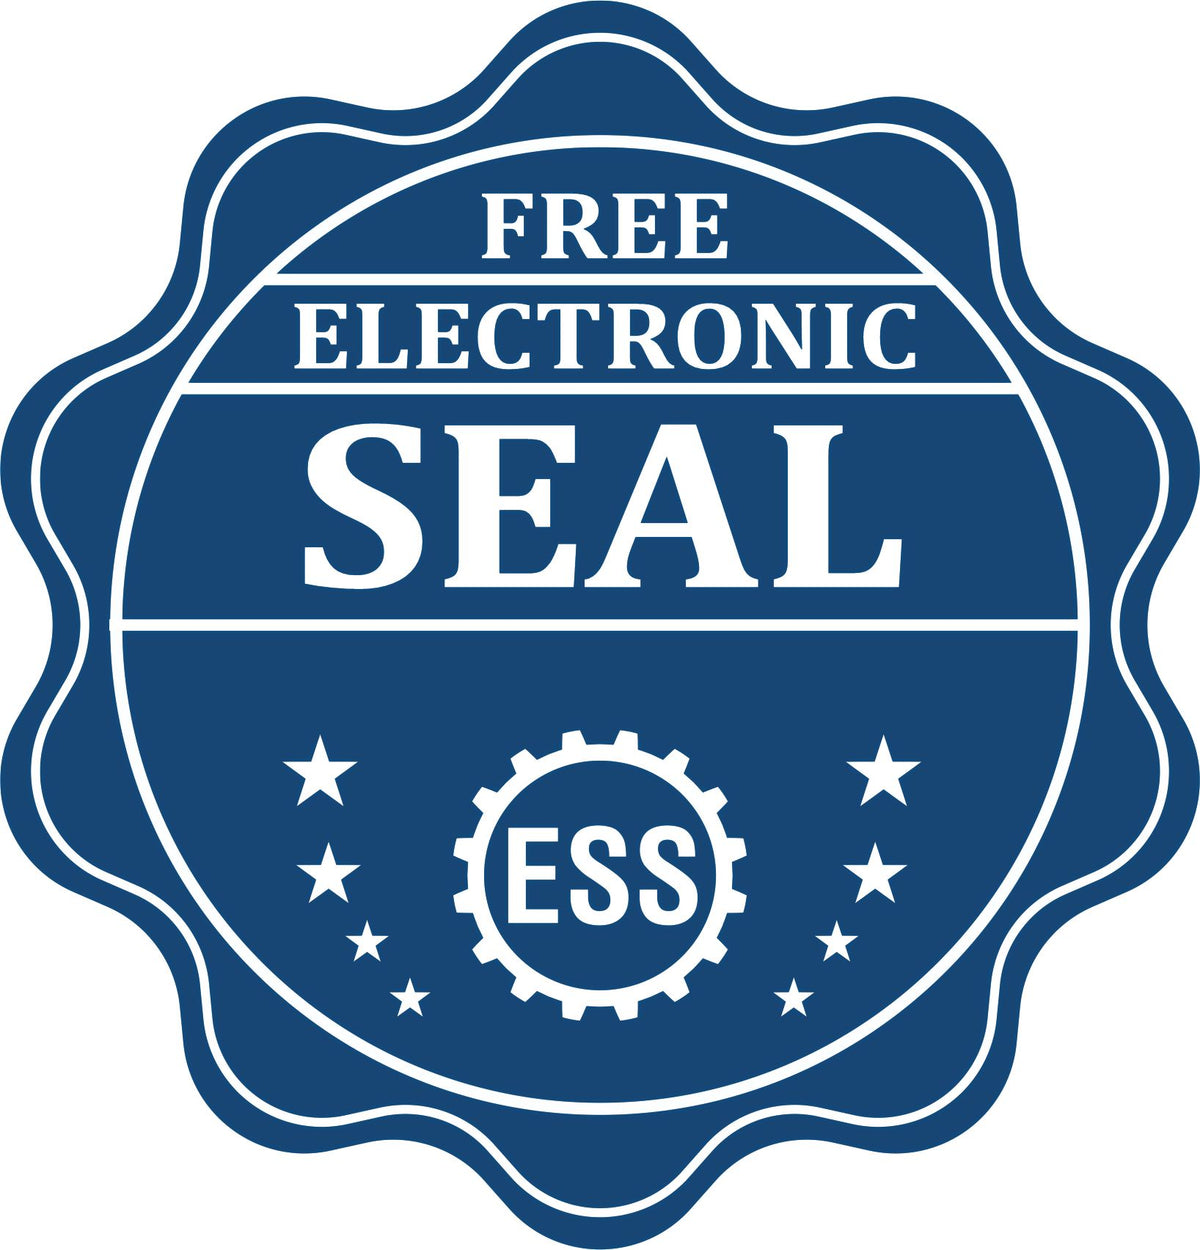 A badge showing a free electronic seal for the Heavy Duty Cast Iron Virginia Geologist Seal Embosser with stars and the ESS gear on the emblem.